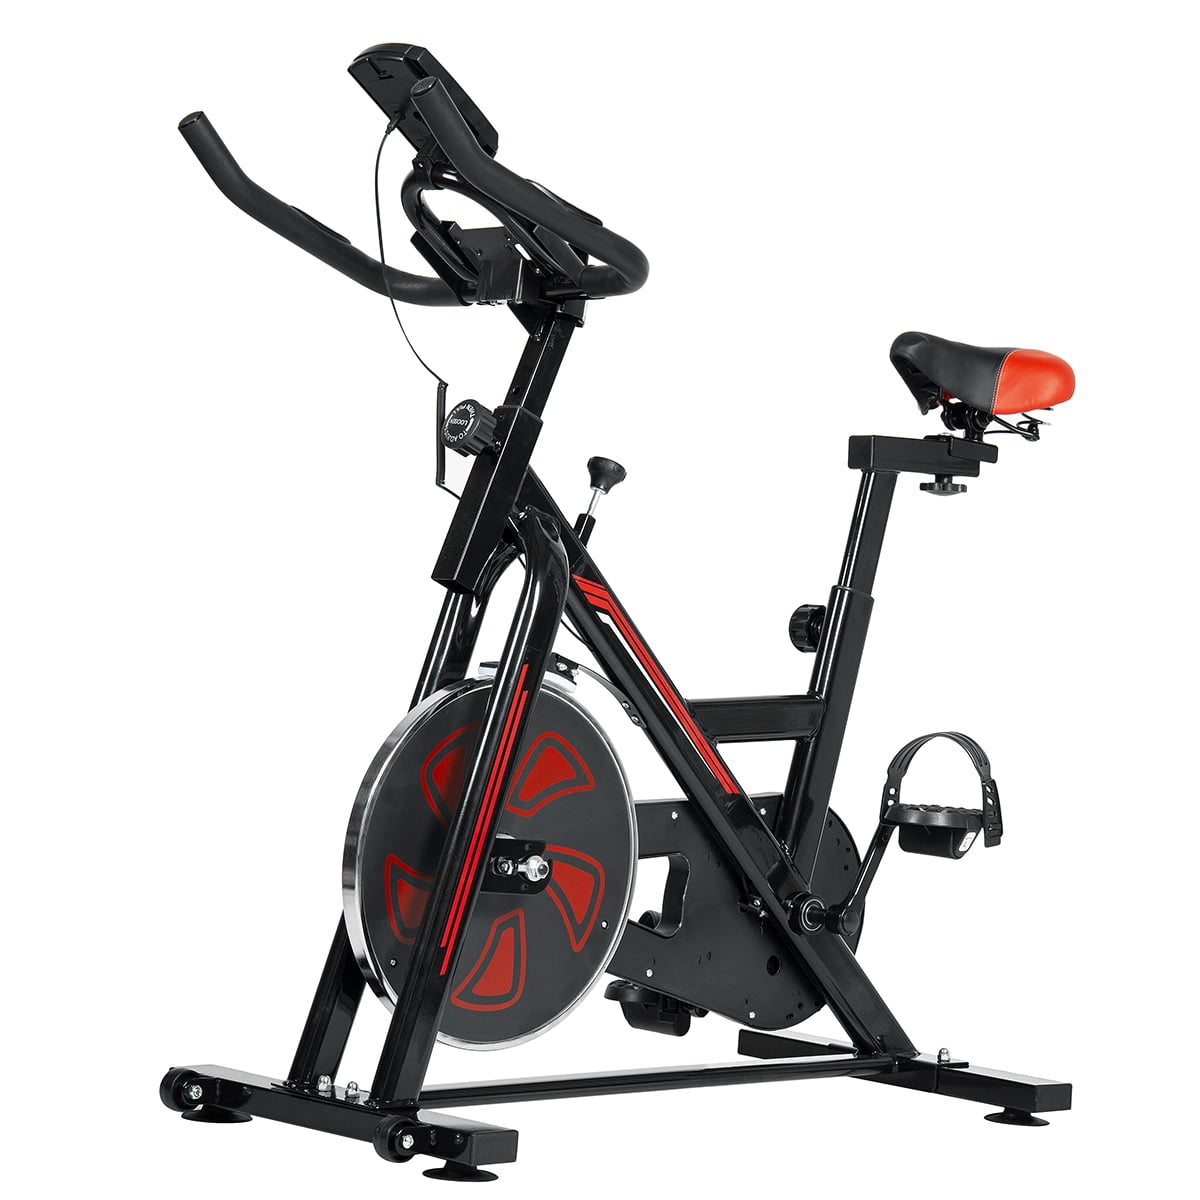 Details about   Exercise Bike Fitness Gym Indoor Cycling Stationary Bicycle Cardio Workout w/LCD 